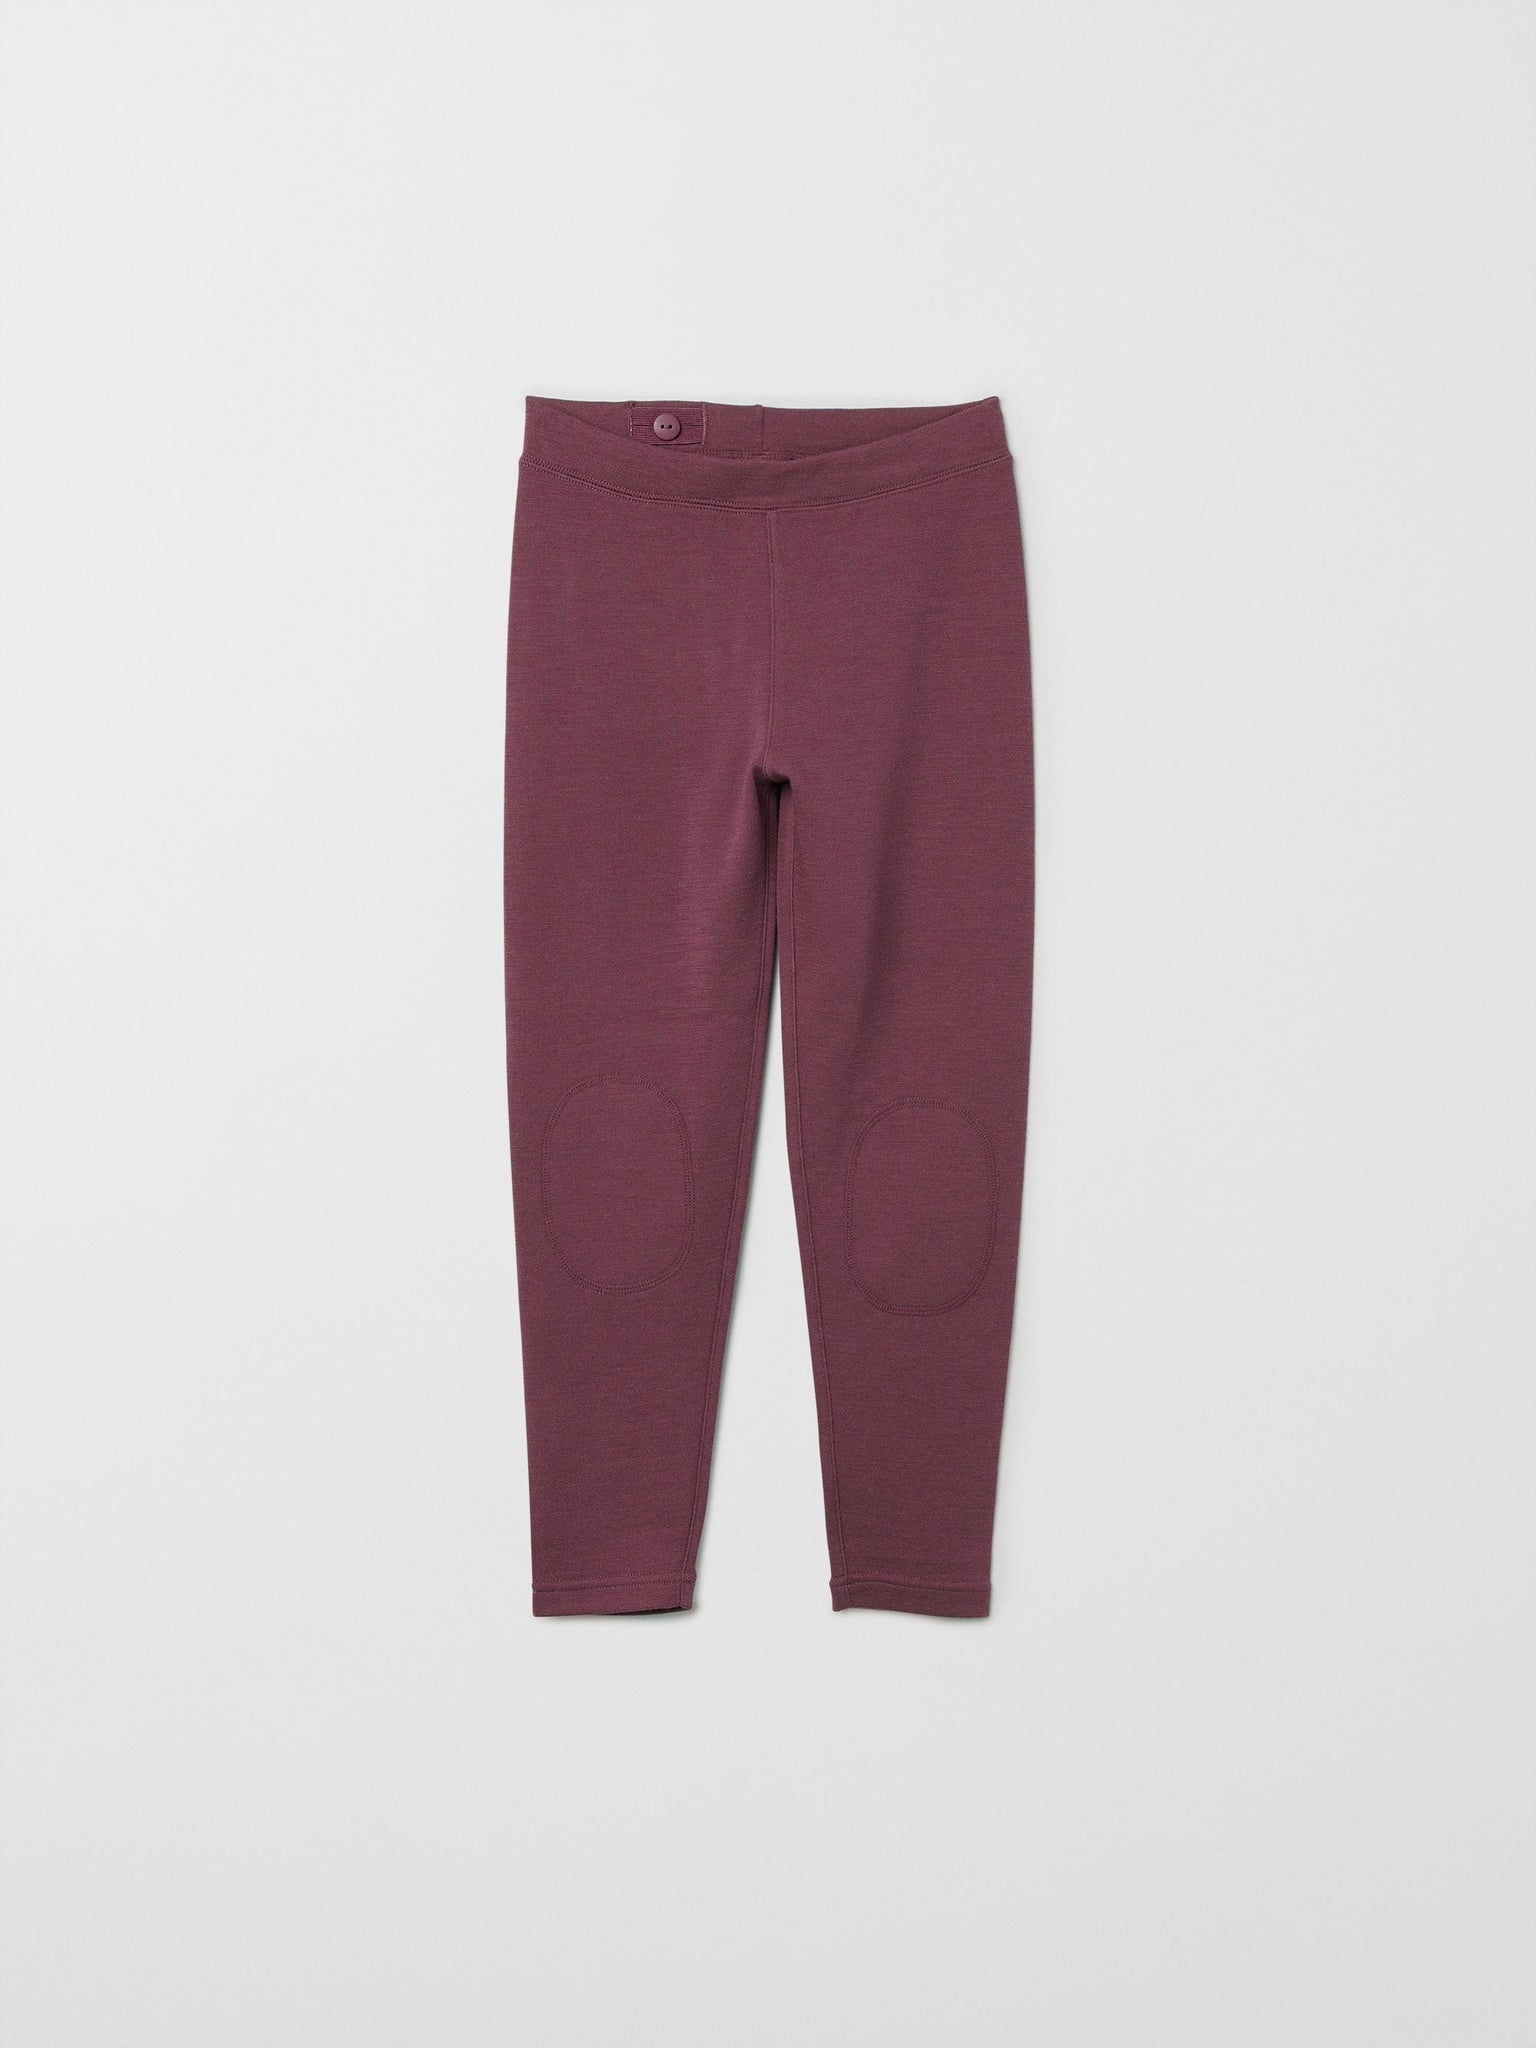 Merino Wool Kids Red Thermal Leggings from the Polarn O. Pyret kids collection. Ethically produced kids clothing.